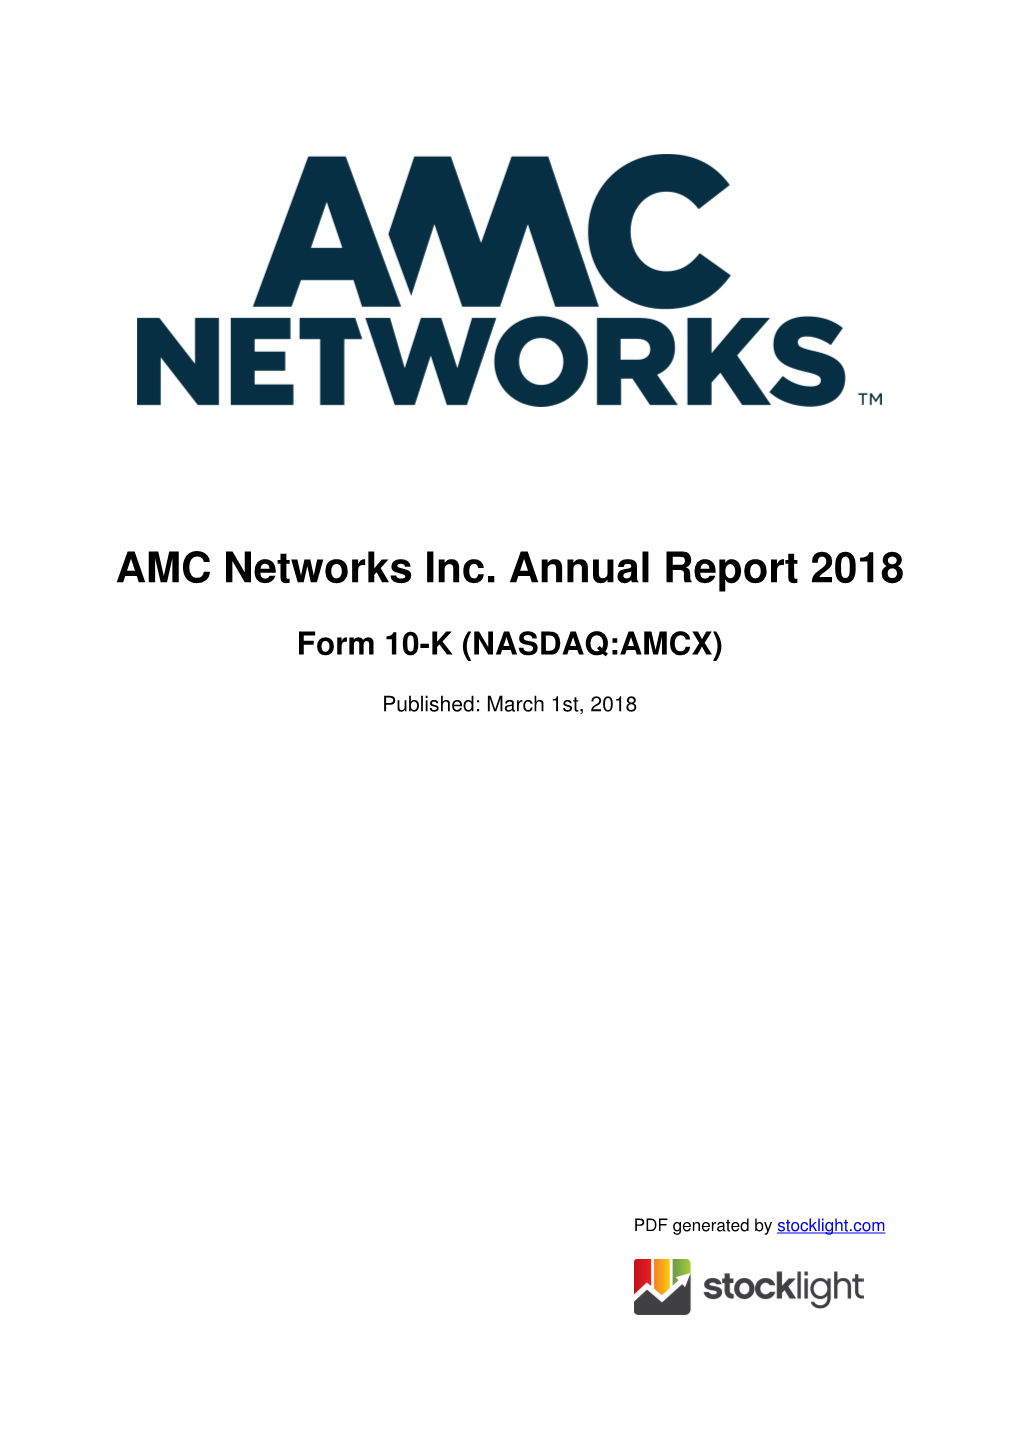 AMC Networks Inc. Annual Report 2018